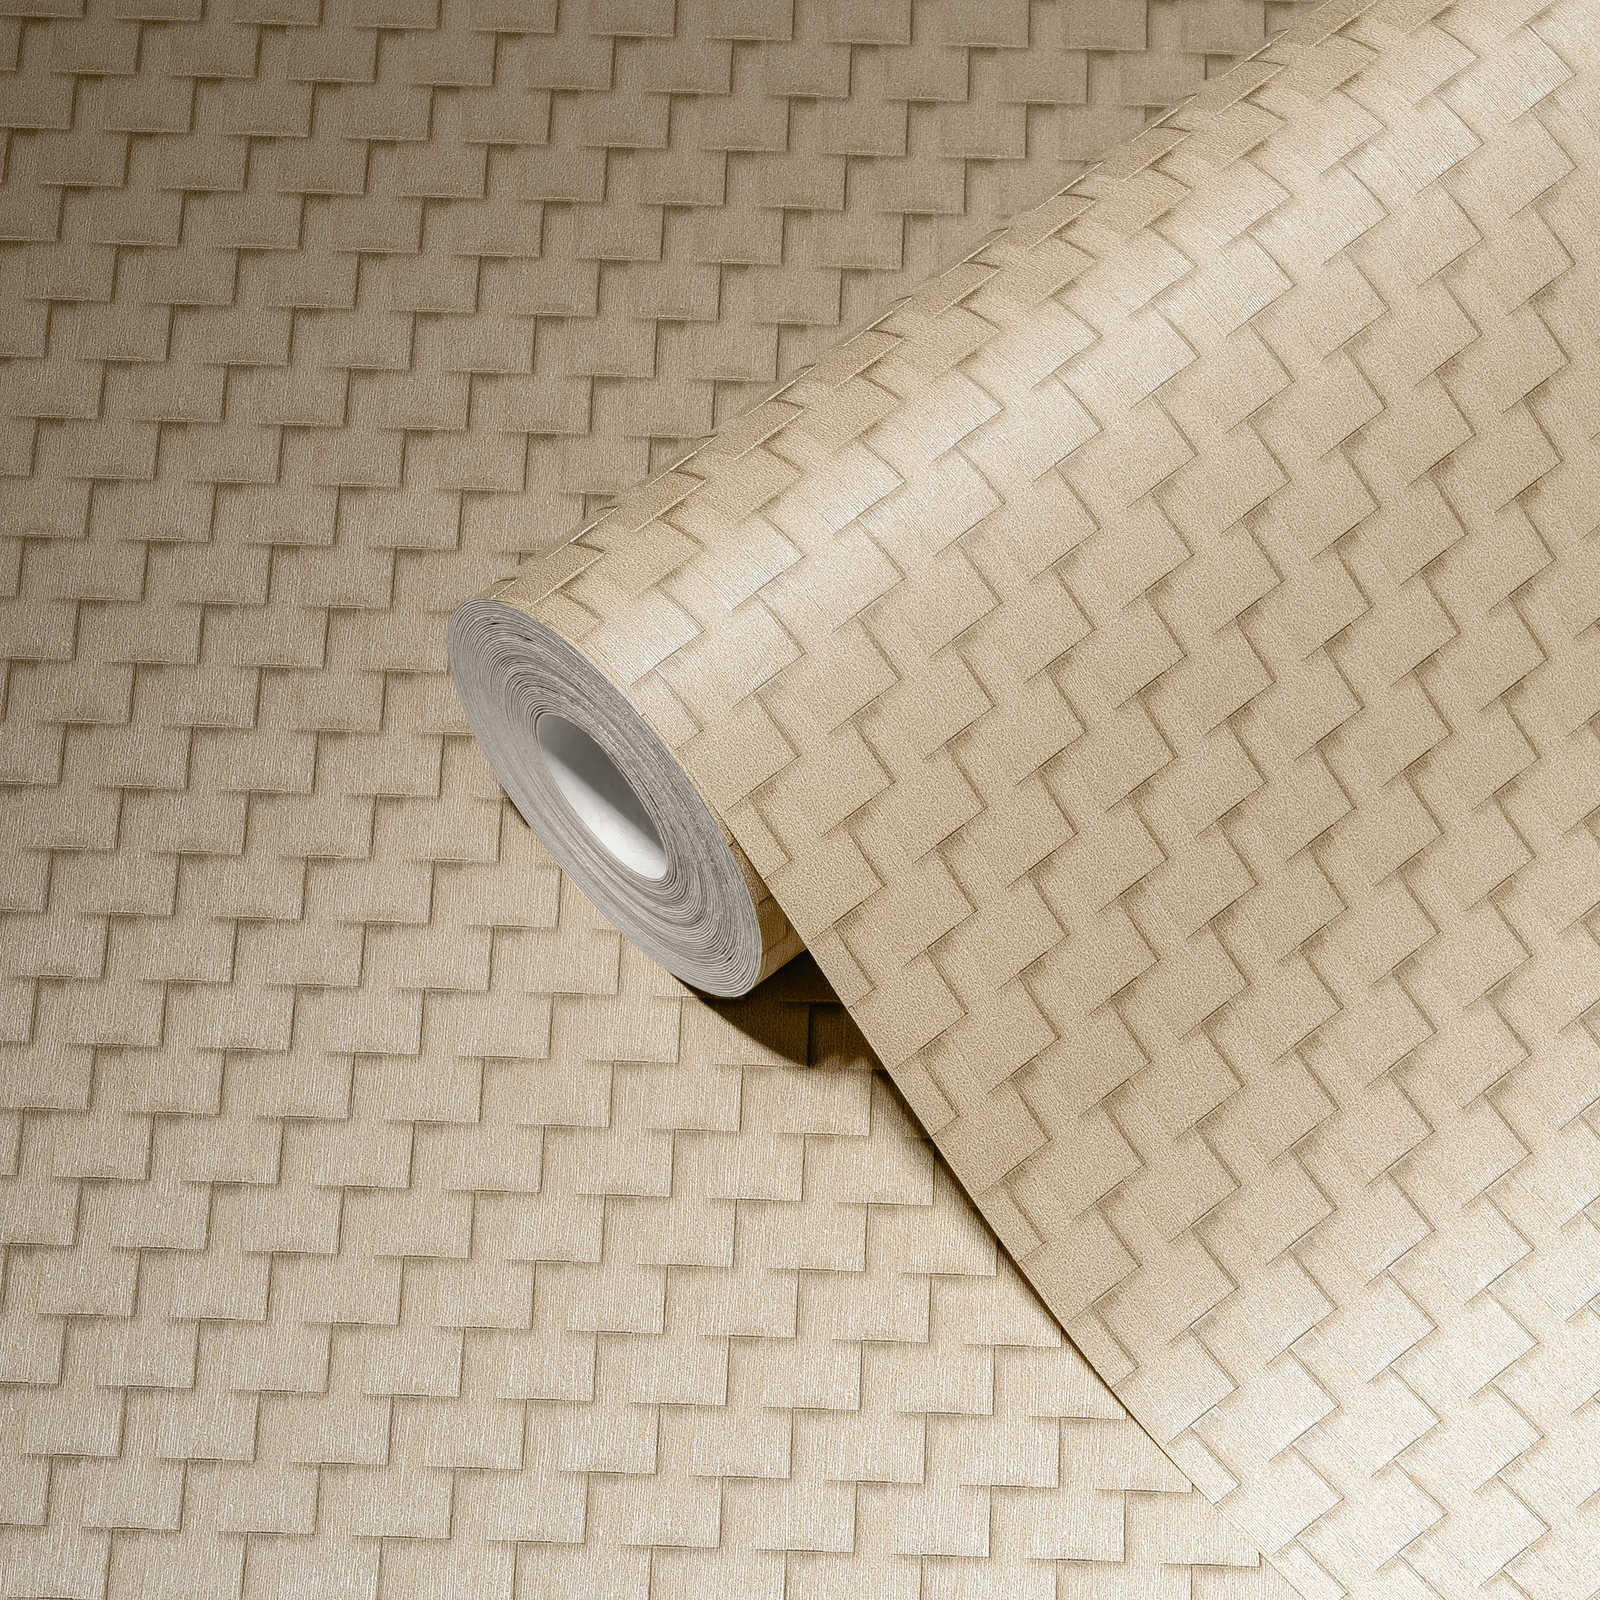             Patterned wallpaper with facet design and 3D effect - beige, bronze
        